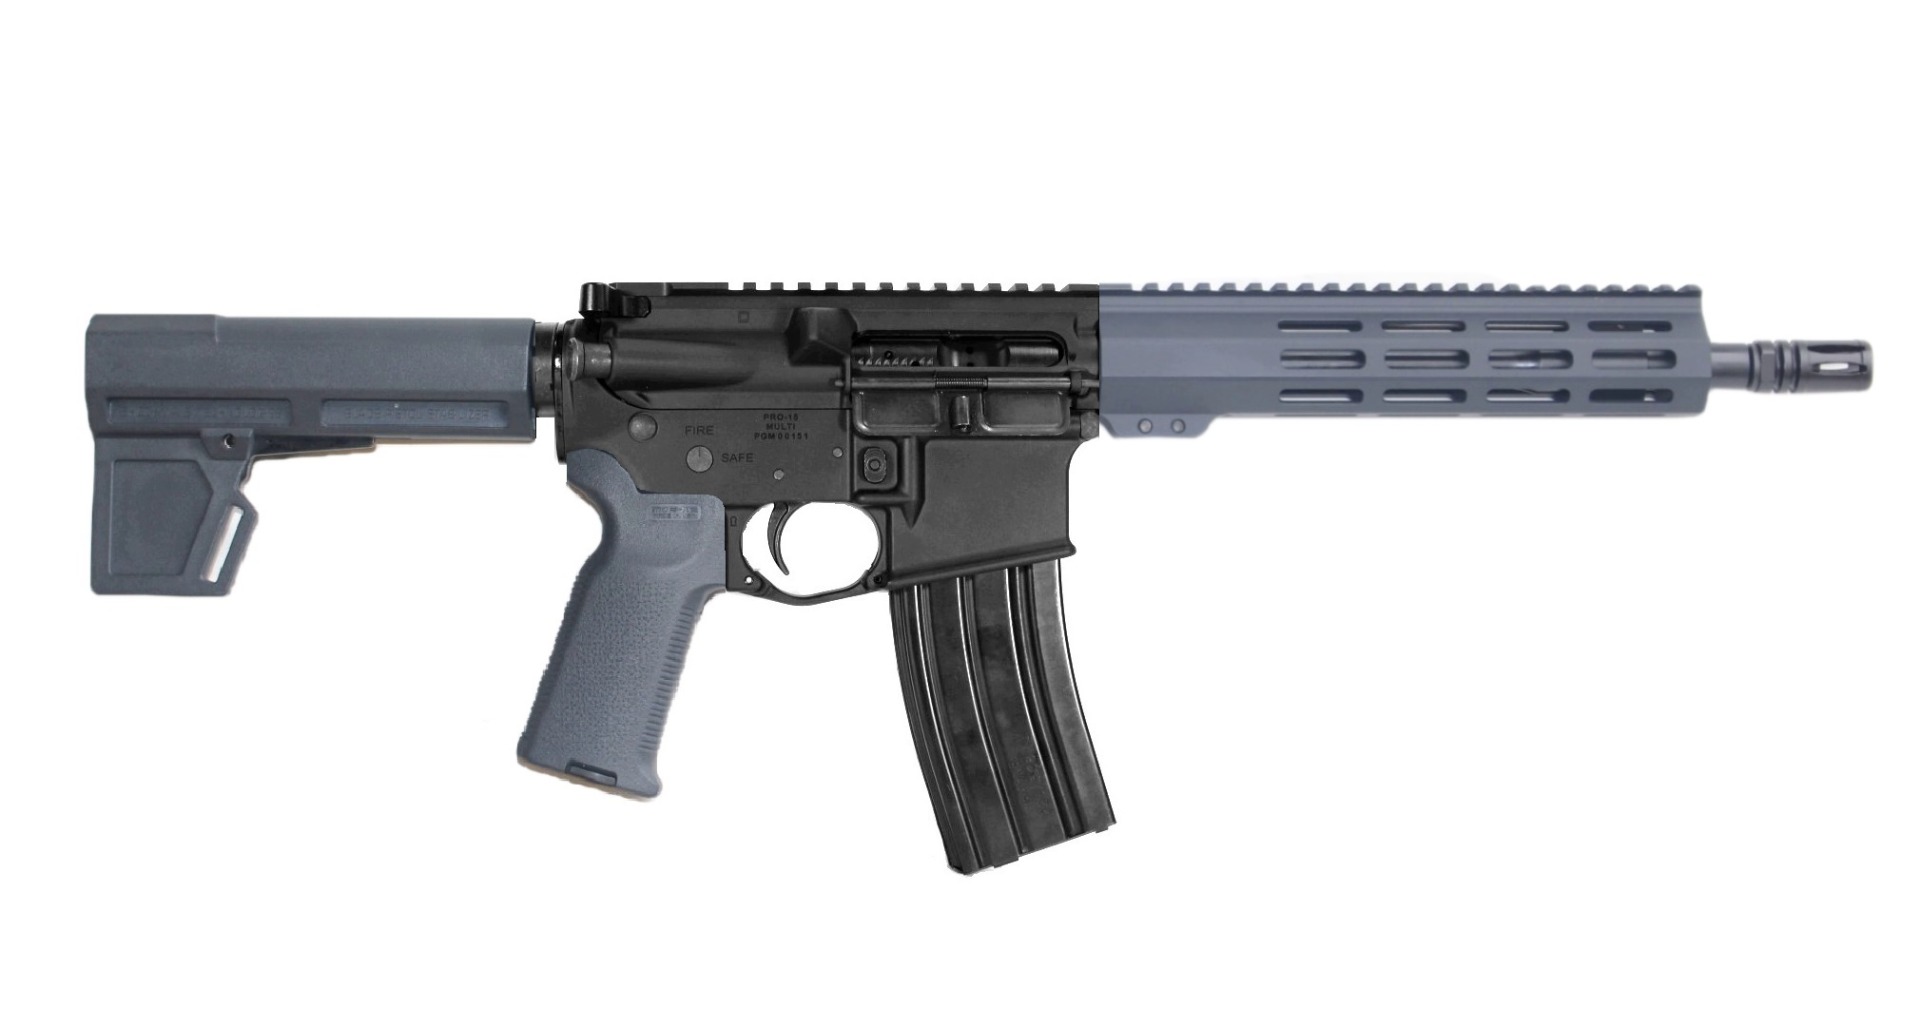 12.7x42 (50 Beowulf) AR-15 Pistols, Pro2A Tactical